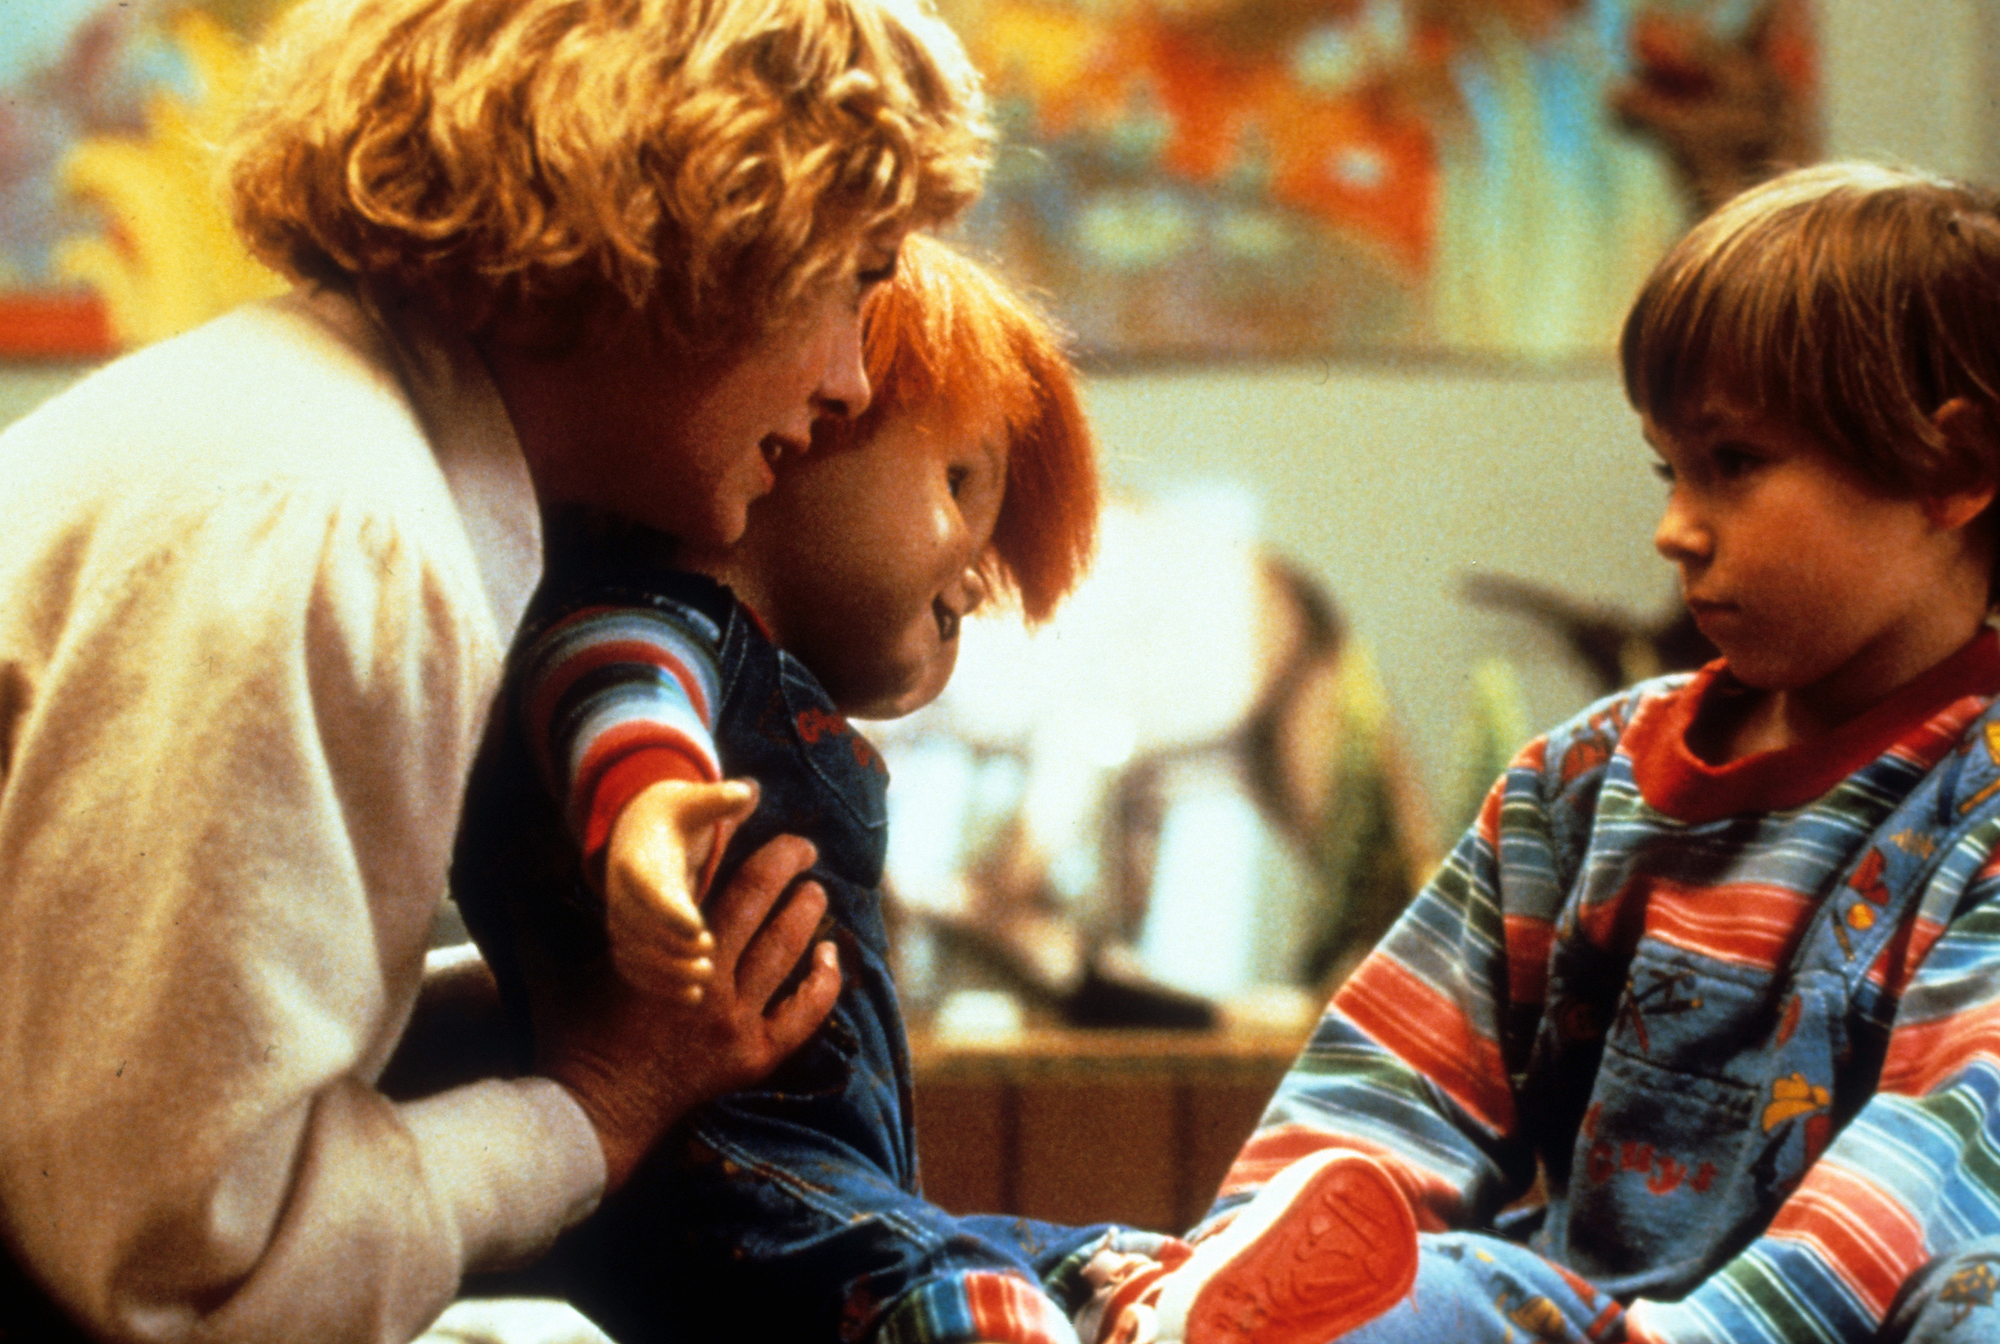 Child's Play: Catherine Hicks presents Alex Vincent with Chucky